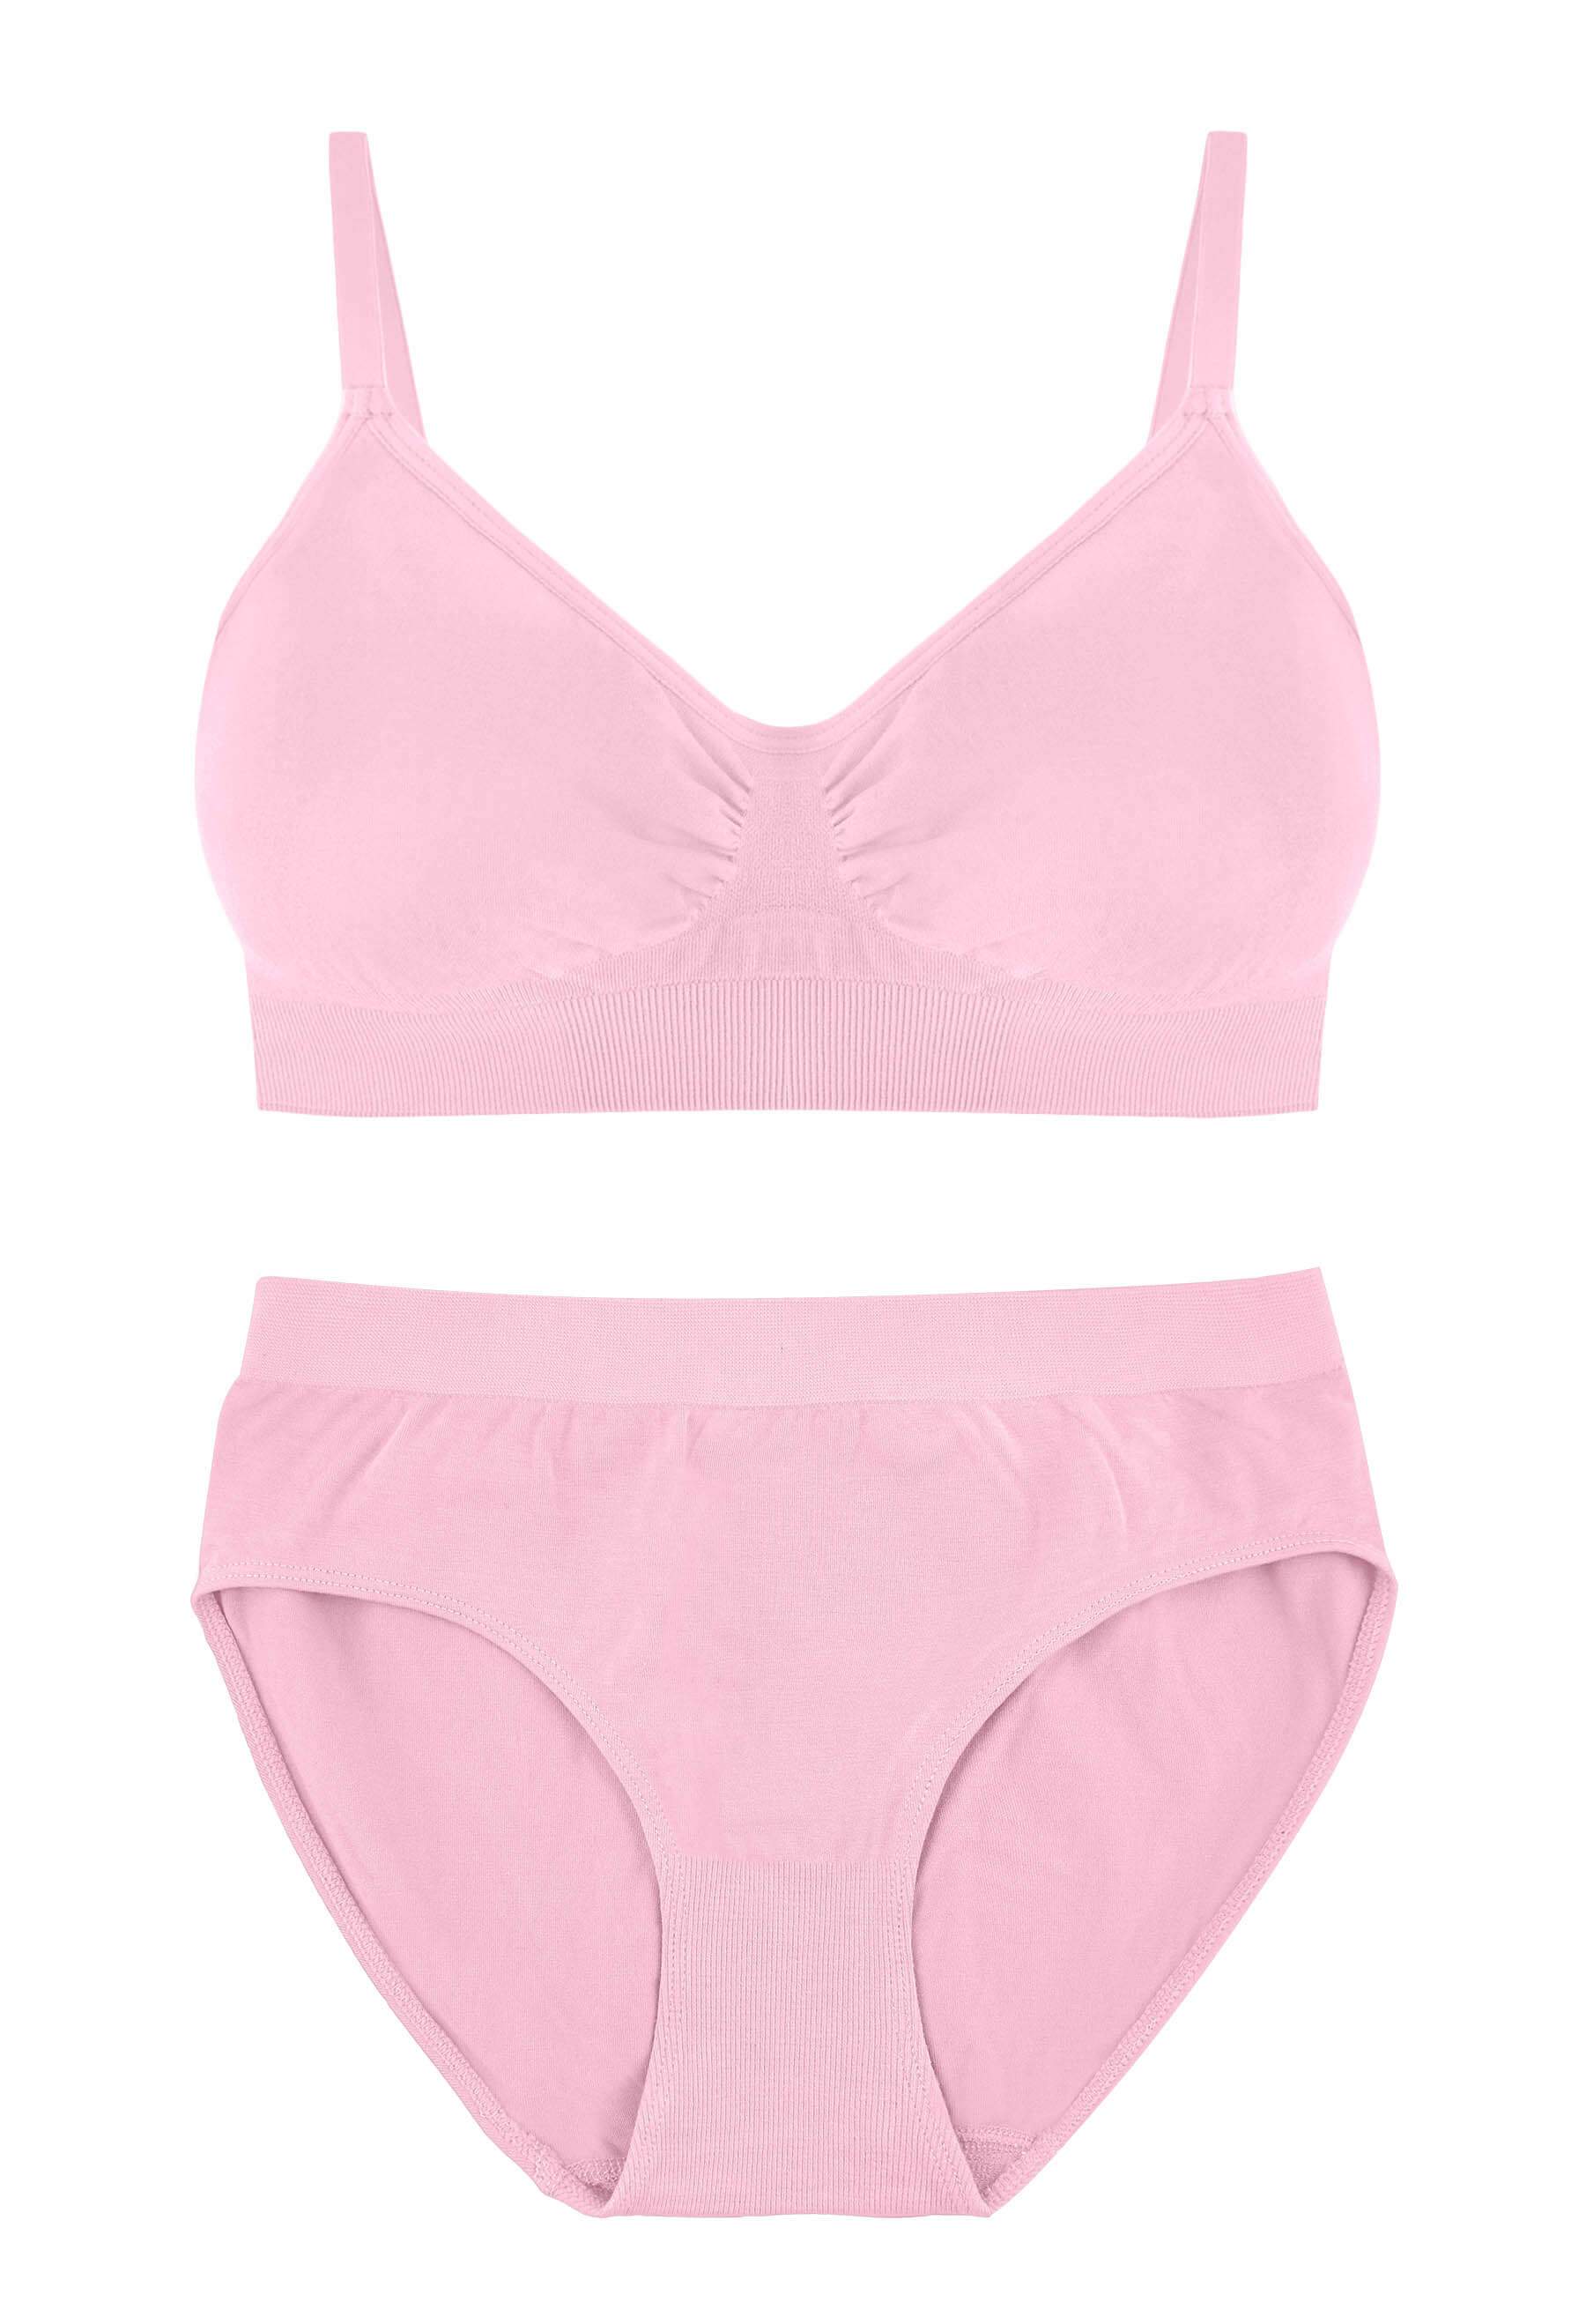 Bamboo Padded Wire Free Bra and High Cut Brief Set